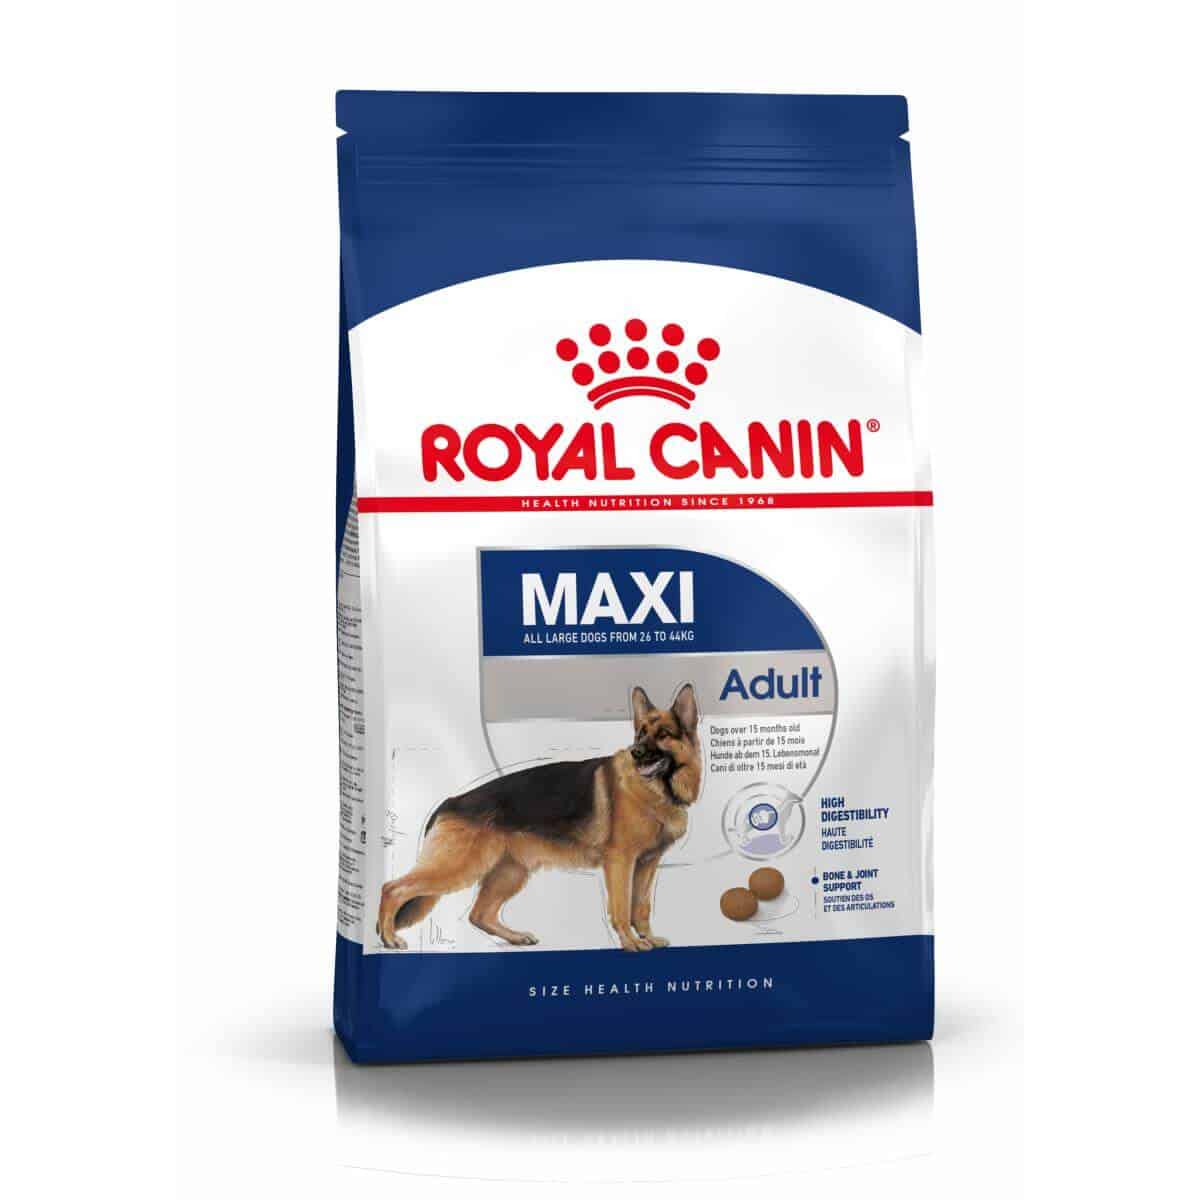 Where Is Royal Canin Dog Food Made?